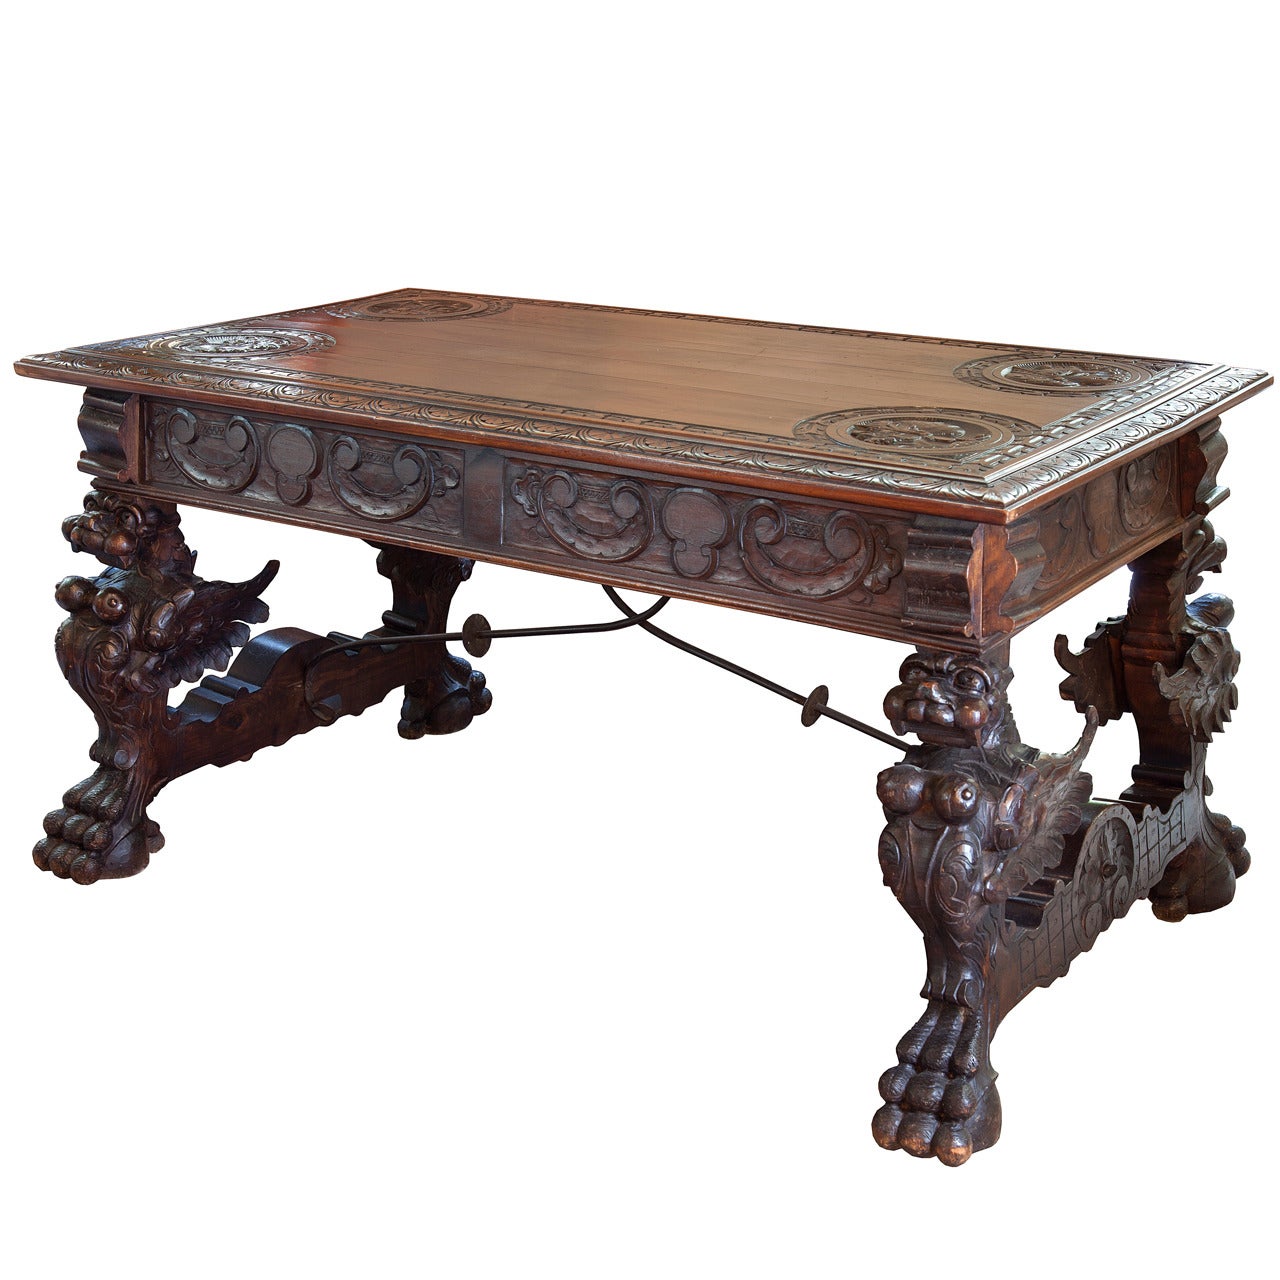 Spanish Desk, 19th c. Well carved with Griffins